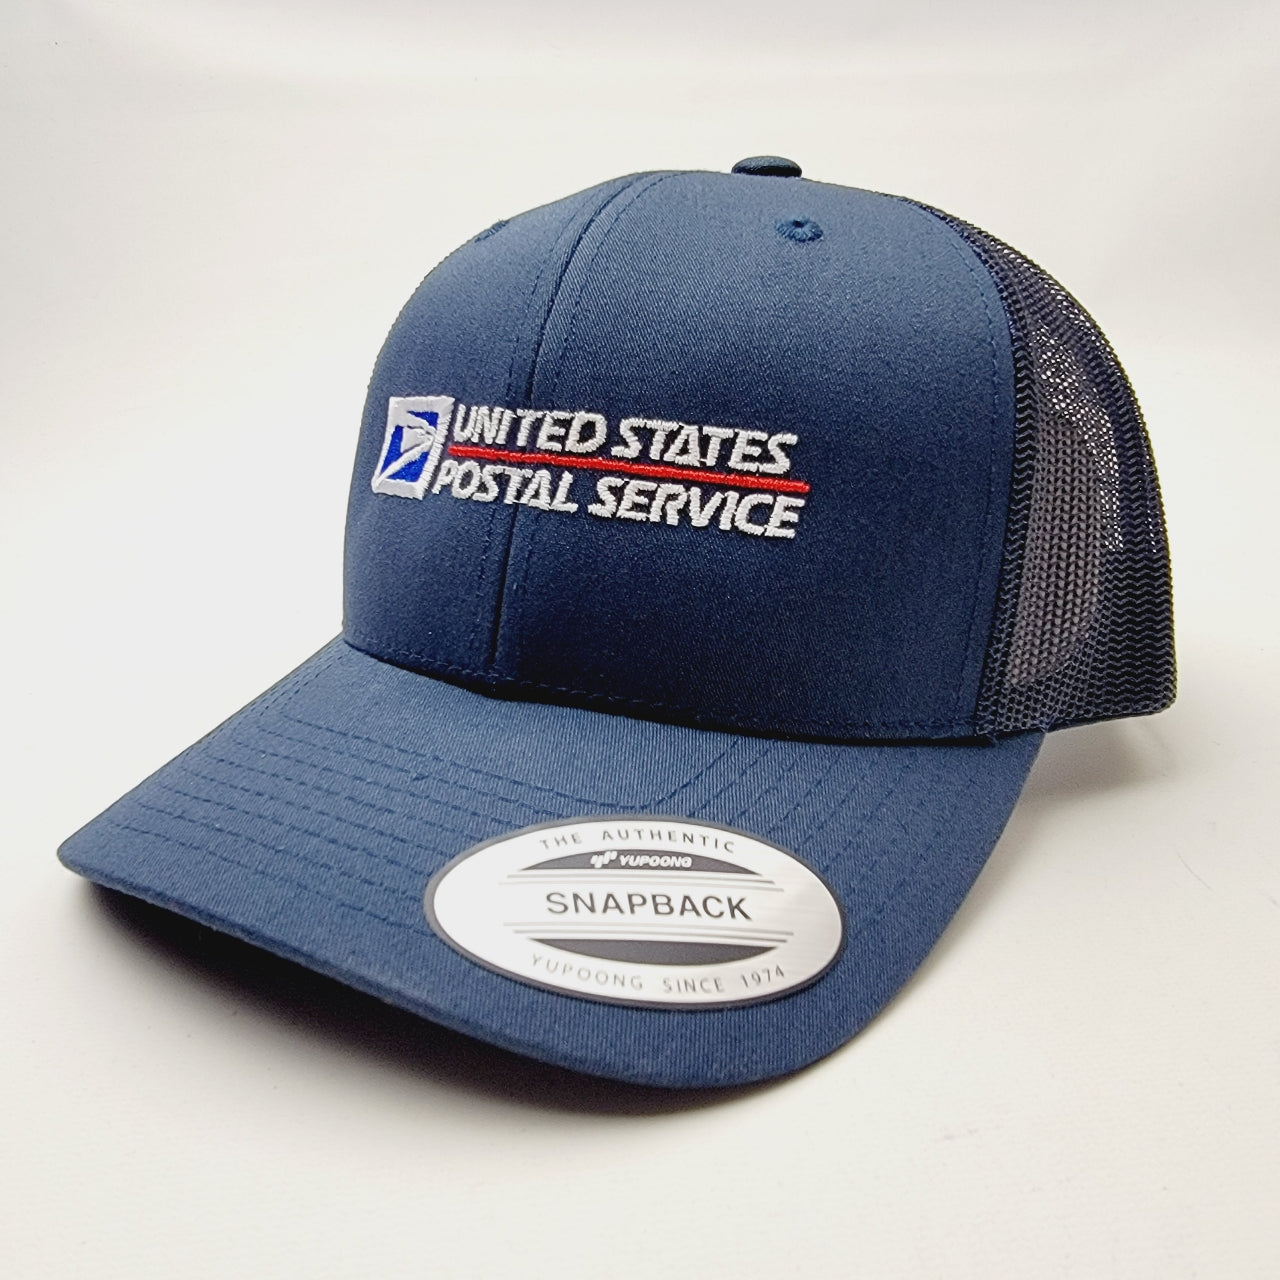 Post Office Postal Embroidered Curved Bill Mesh Snapback Cap Hat Navy Blue